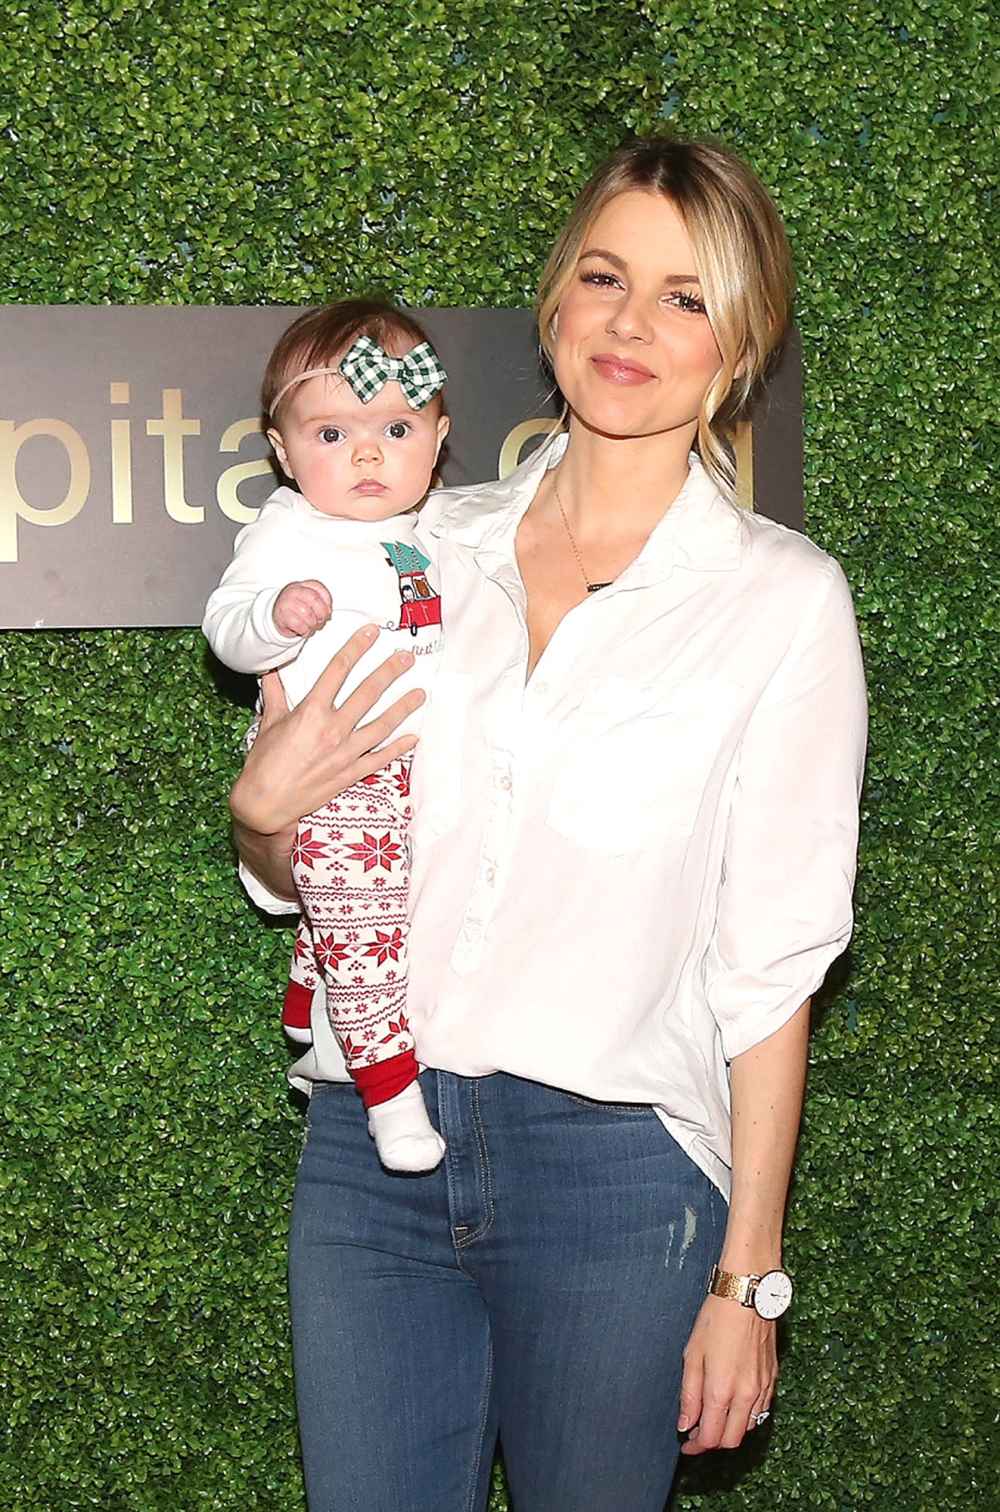 Bachelor Nation's Ali Fedotowsky Shares Her Family's Summer Essentials